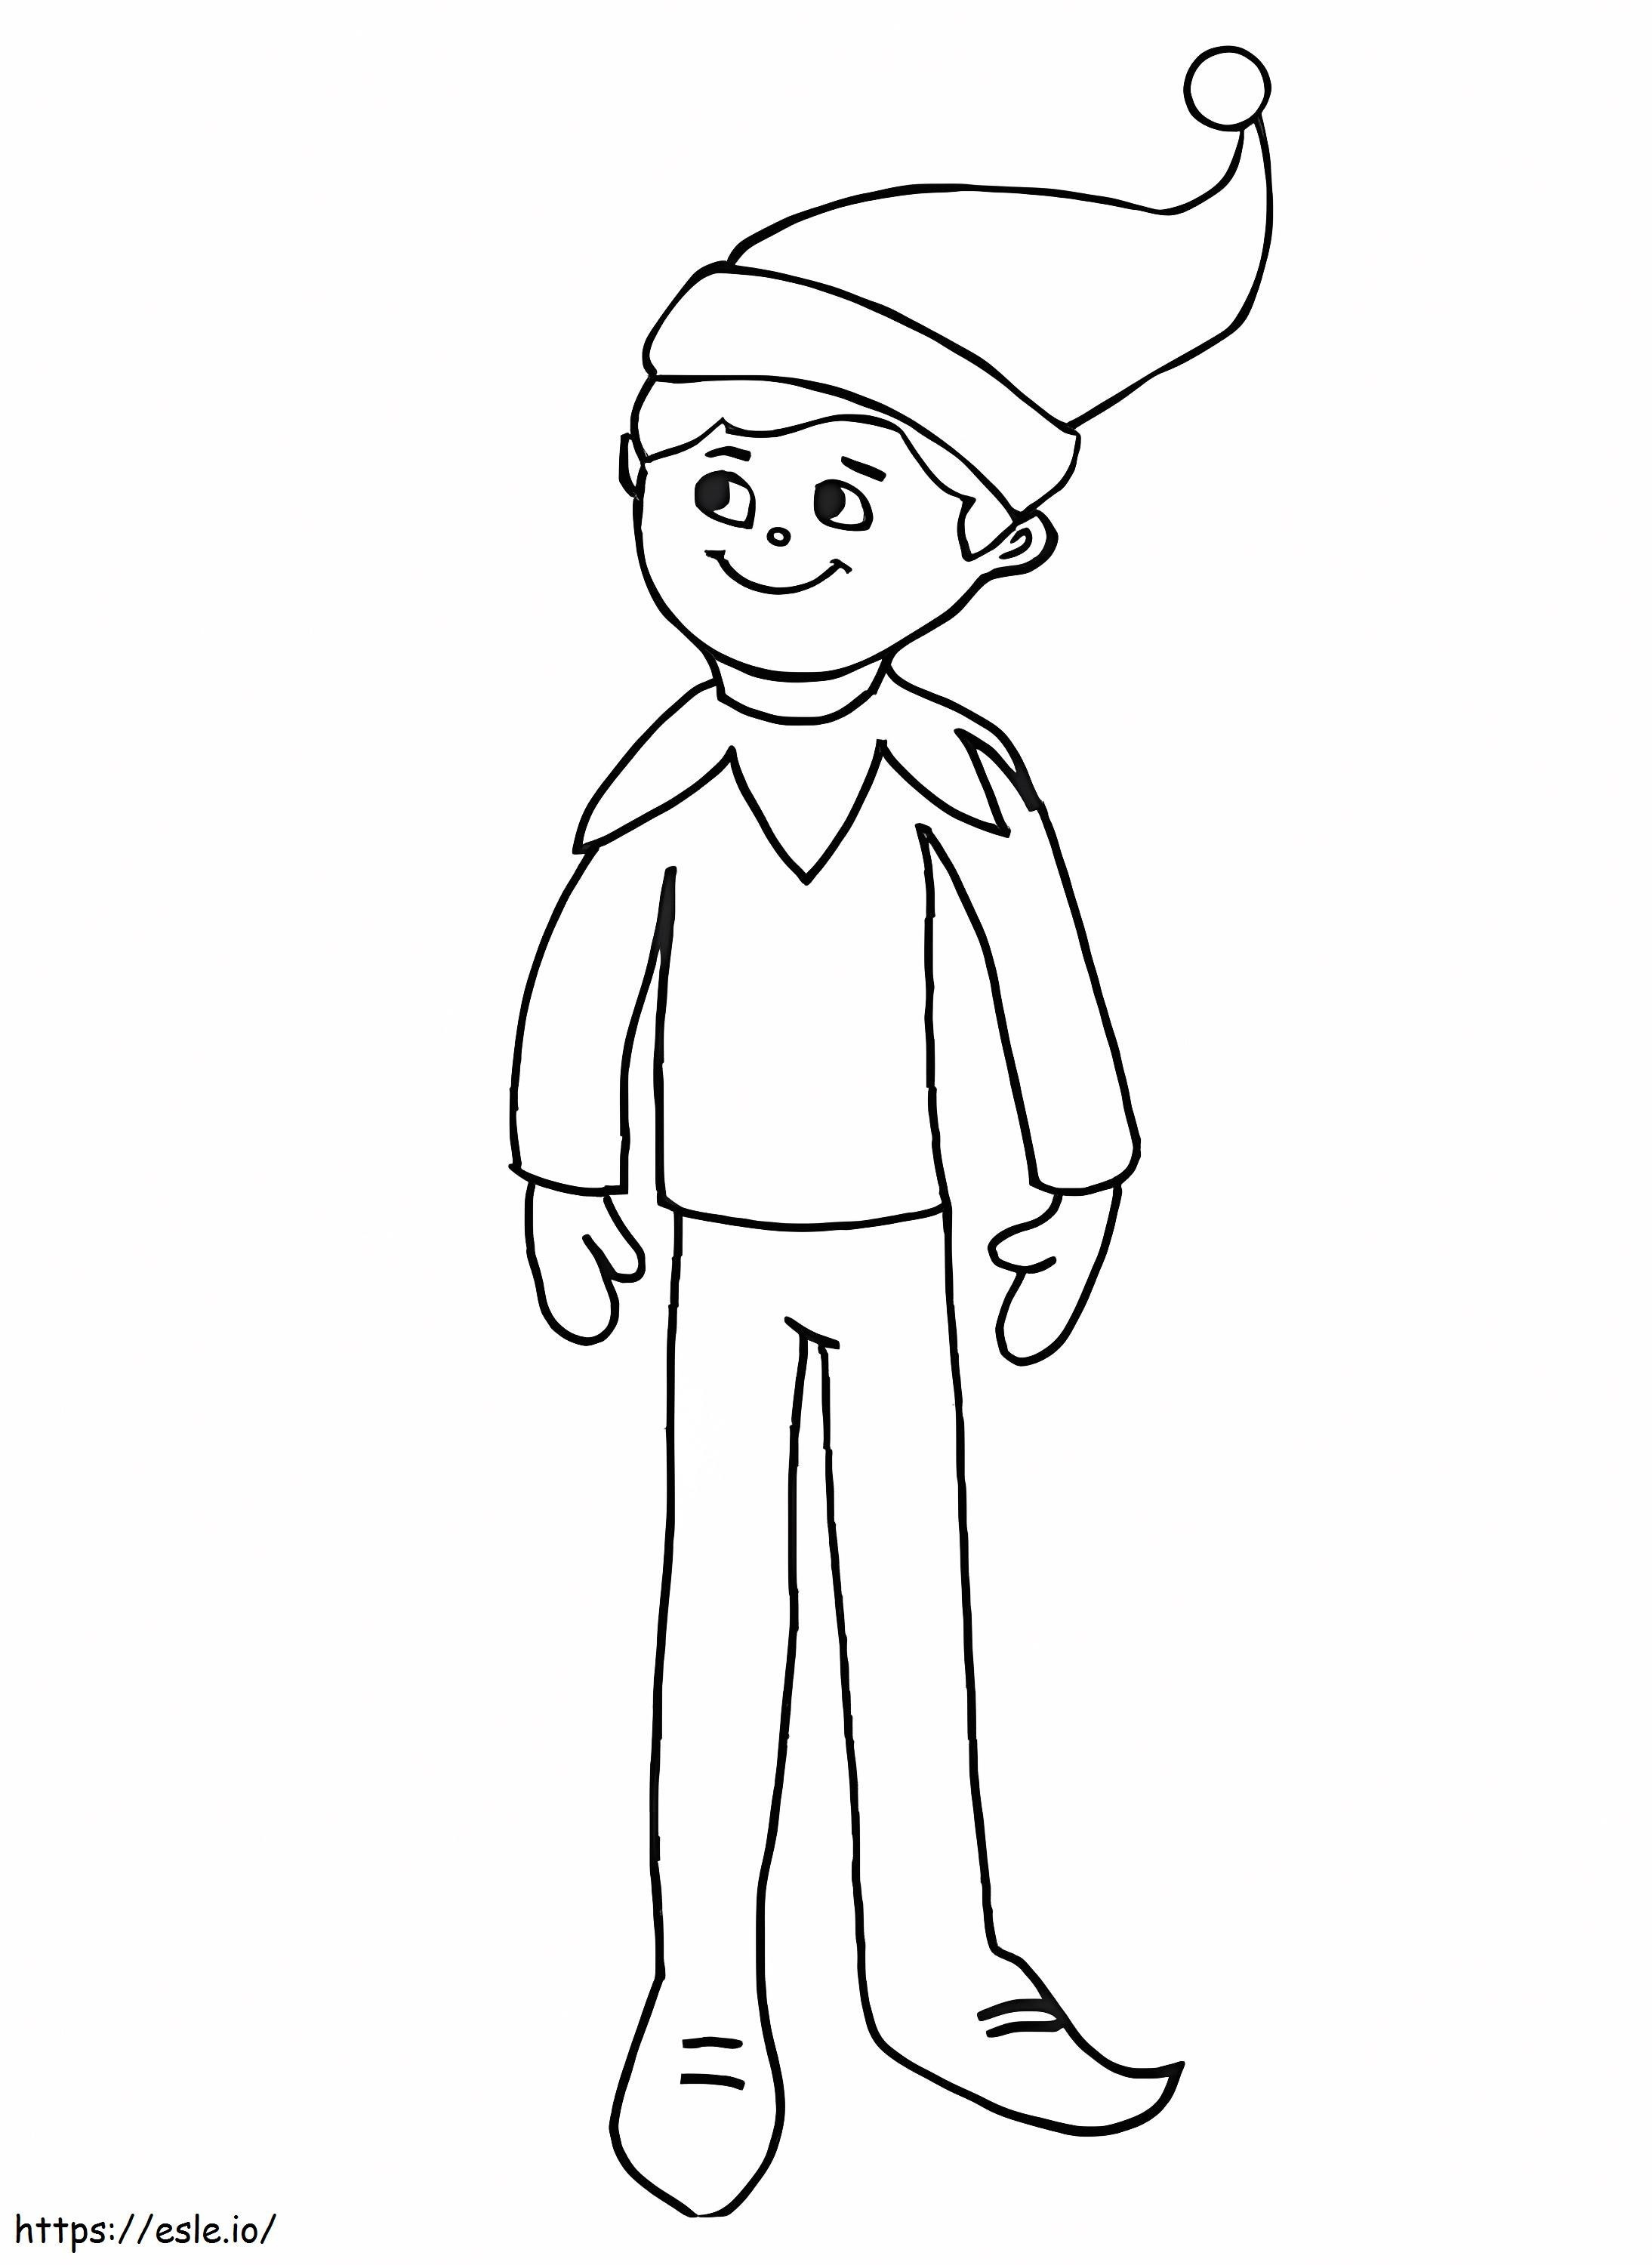 Elf Is Standing coloring page